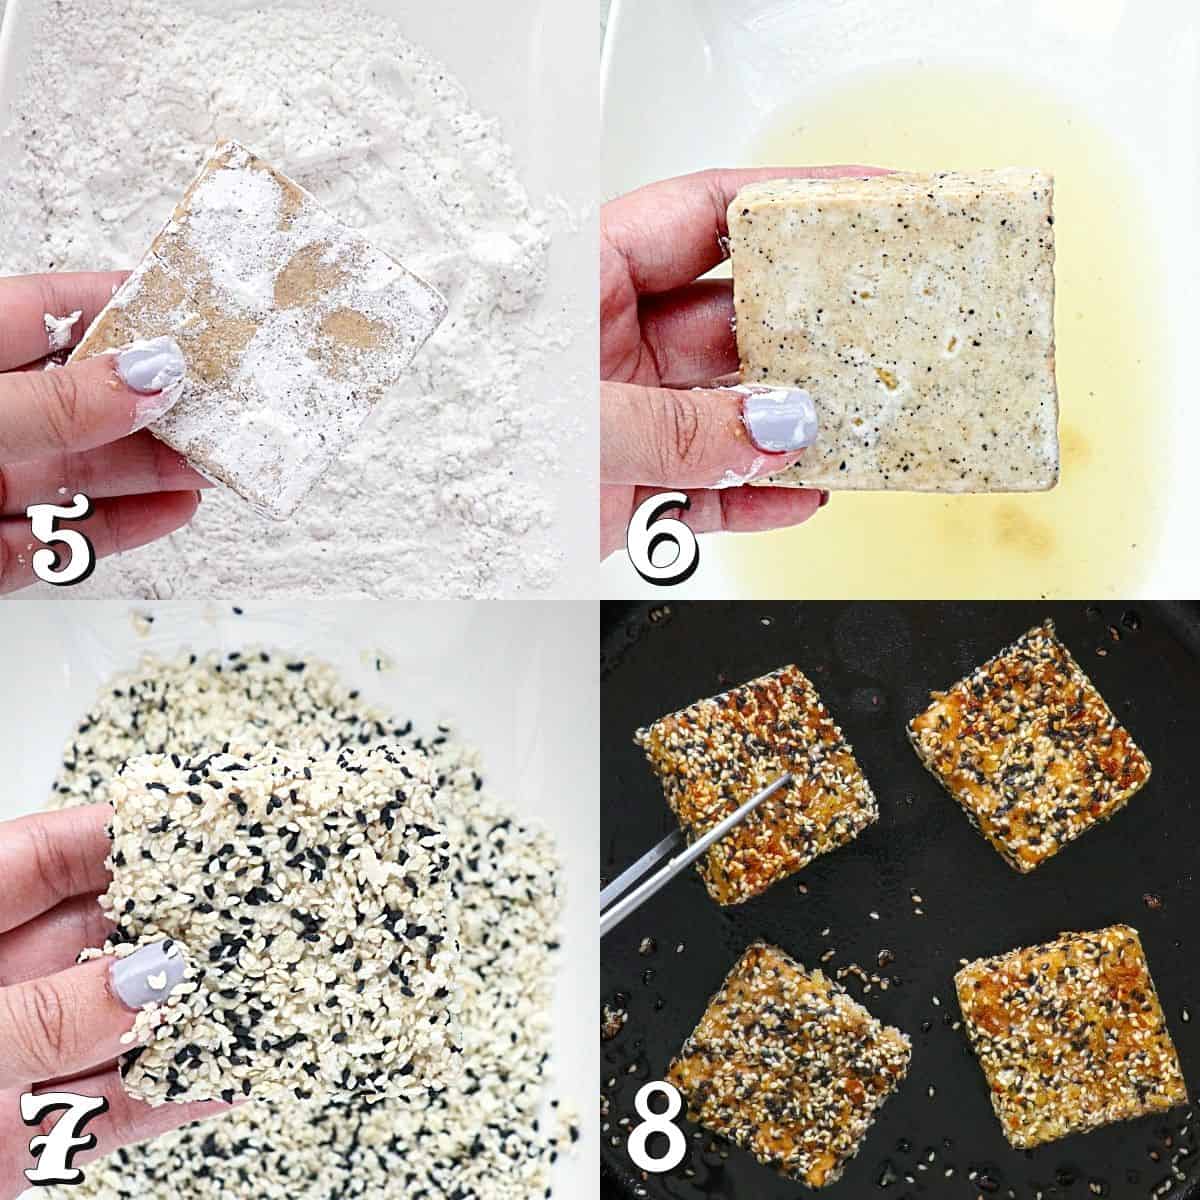 4 process photos of breading and frying tofu. 